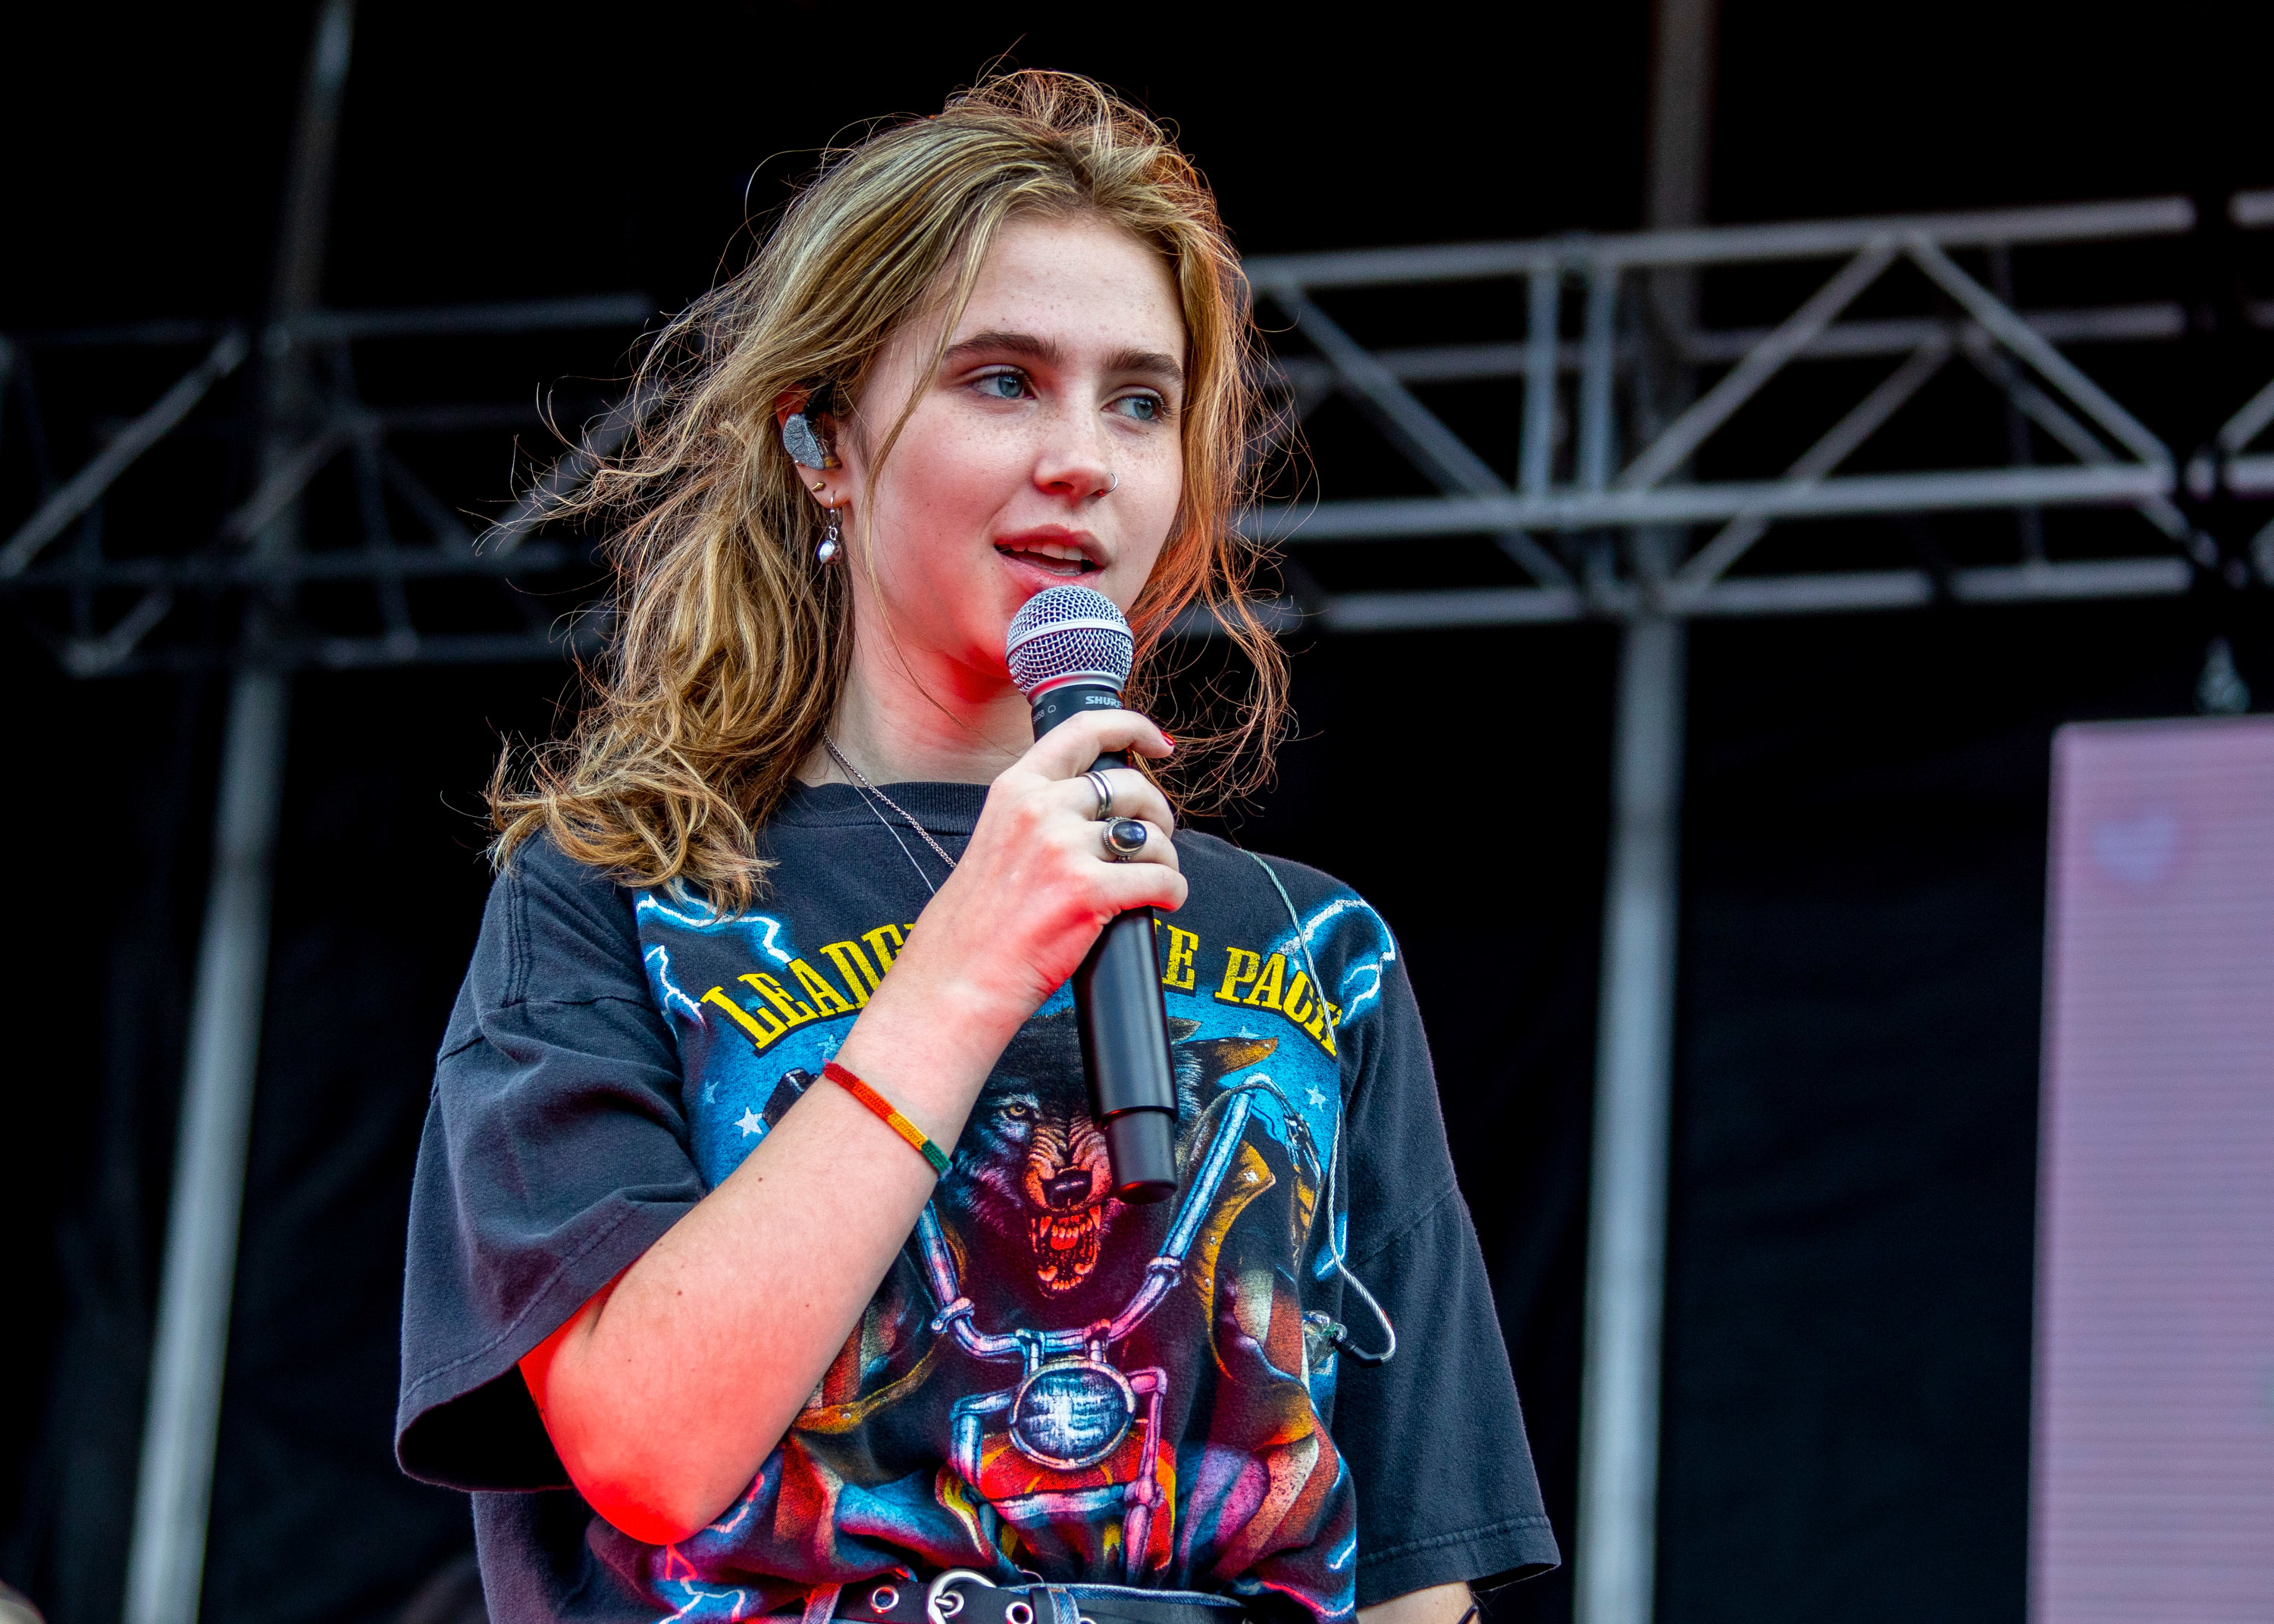 Clairo Singer 2021 Wallpaper, HD Celebrities 4K Wallpapers, Images, Photos  and Background - Wallpapers Den